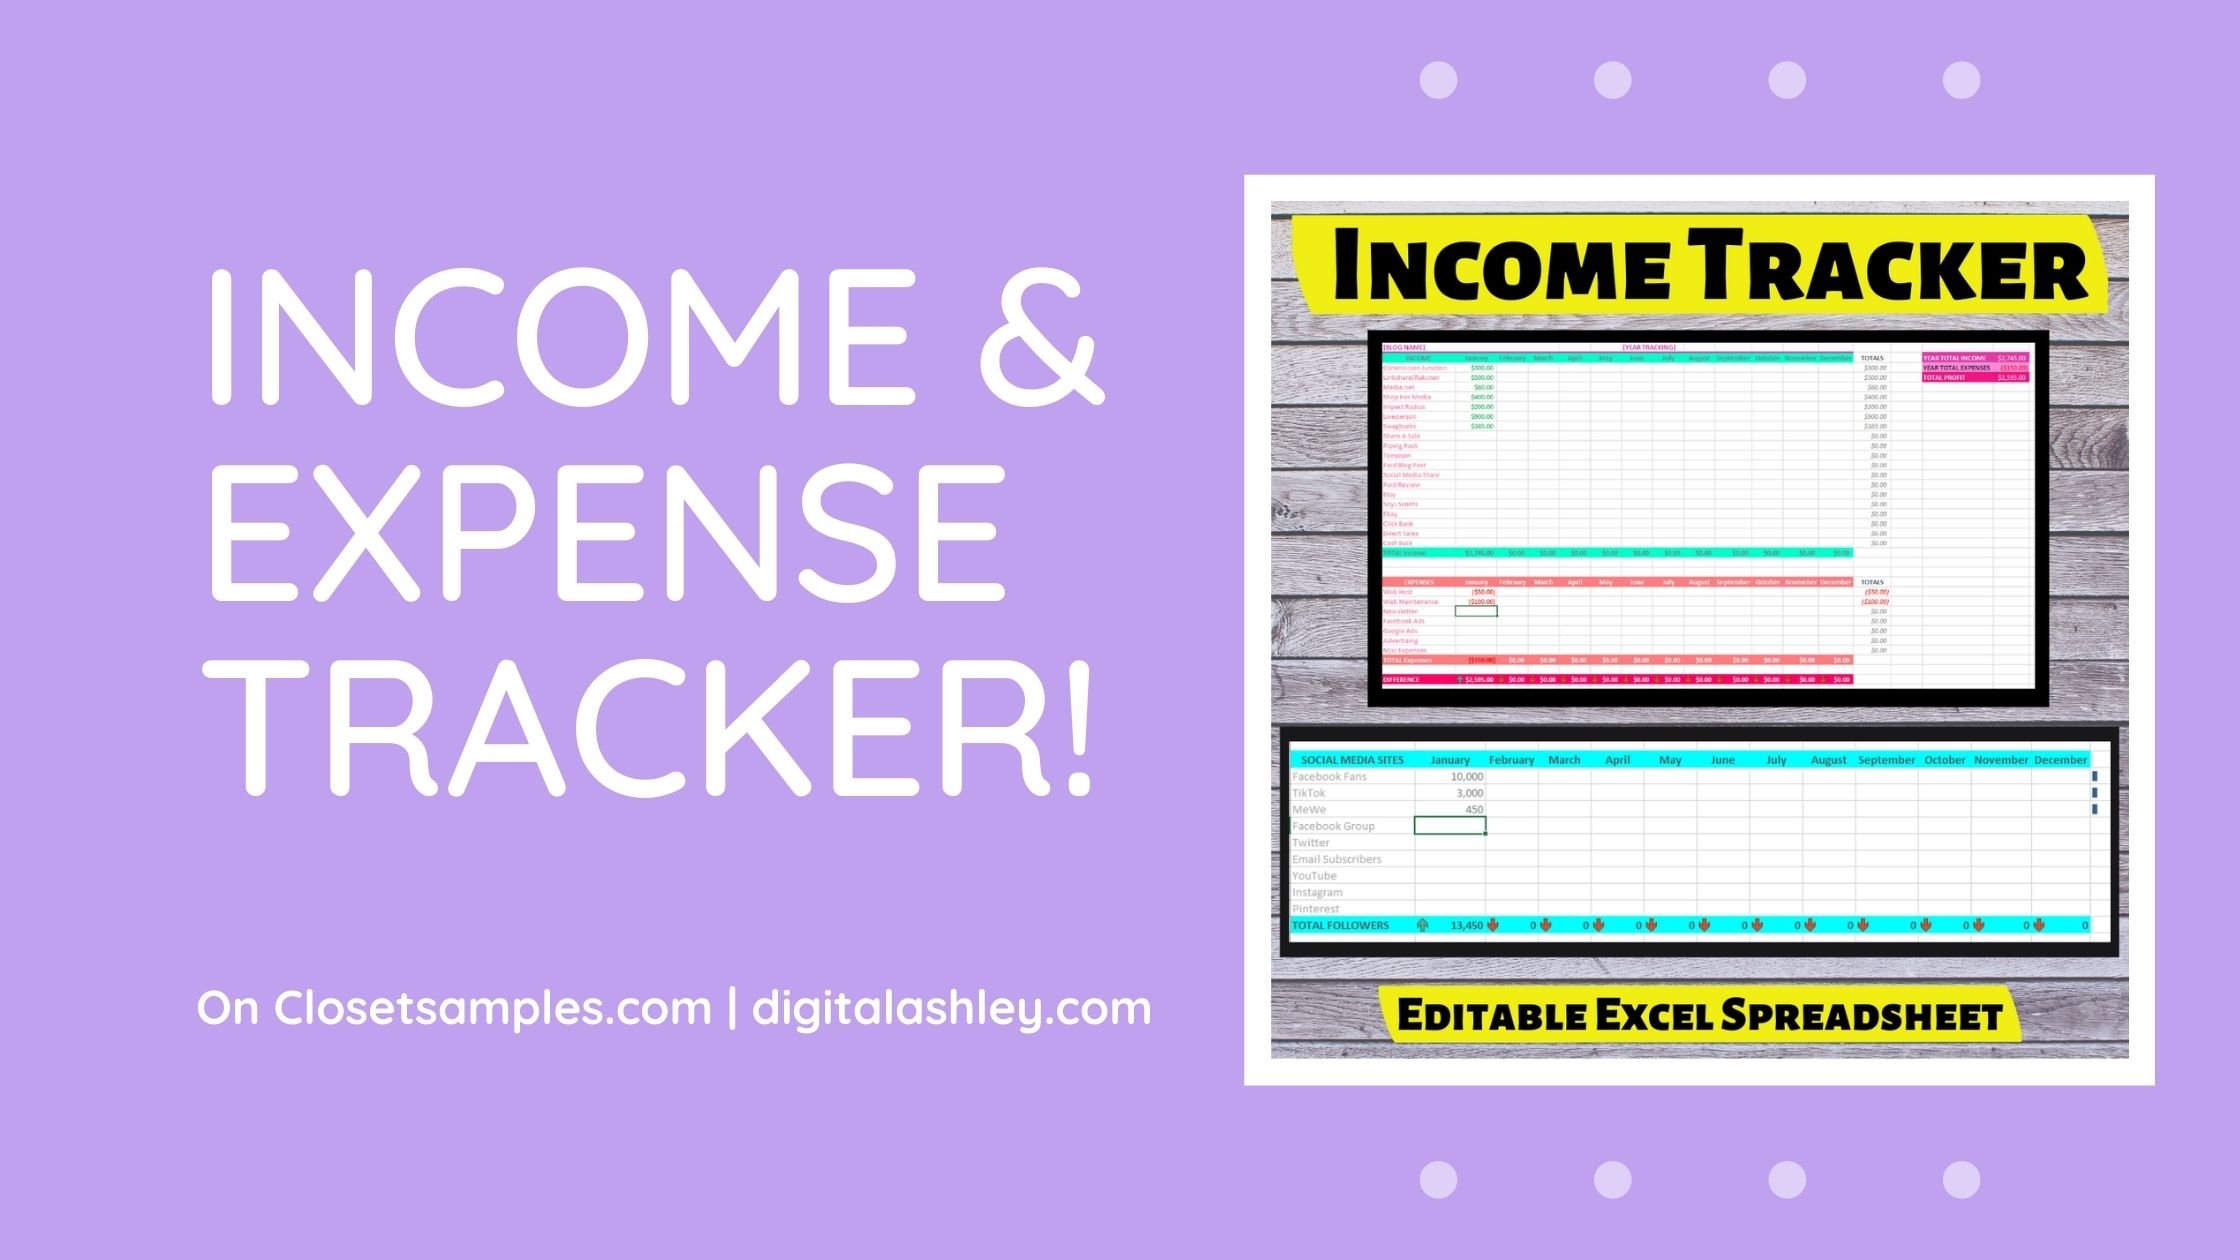 INSTANT DOWNLOAD Customizable Blog Business Income and Expense Social Tracker Excel Spreadsheet